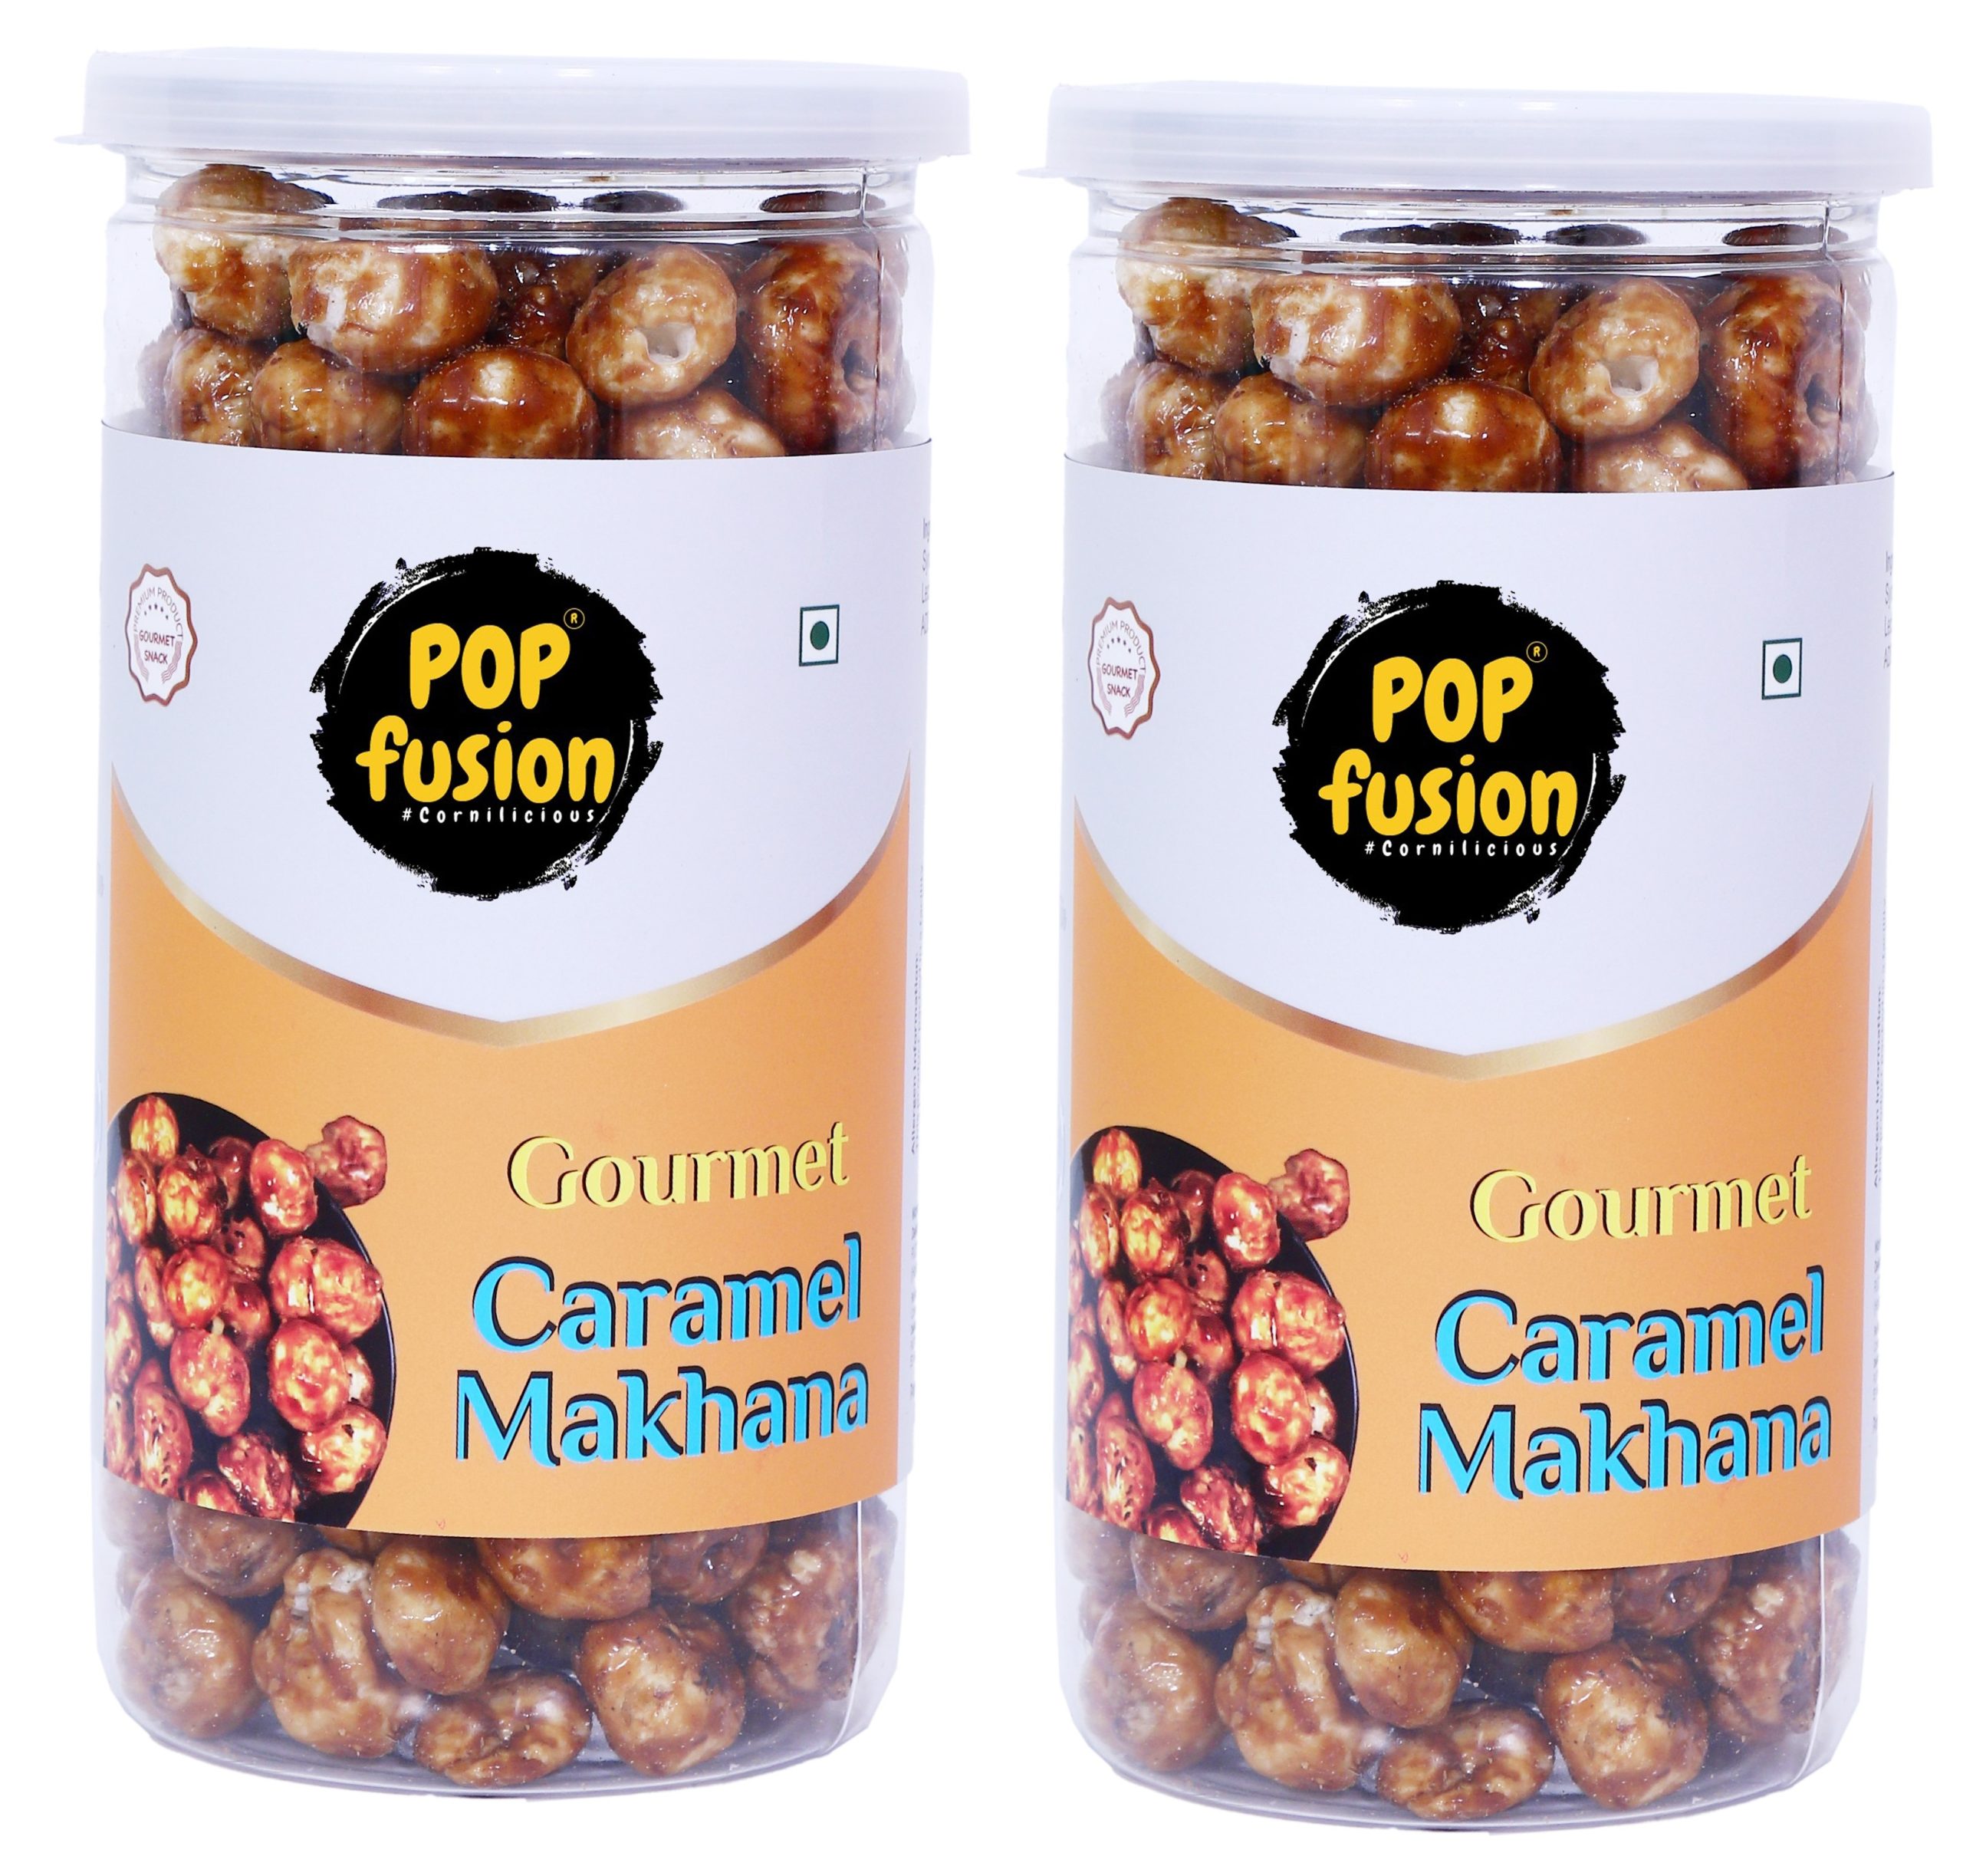 Roasted & Flavoured Makhana- Classic Salted Caramel Makhana, Low Fat Snacks with Airtight Glass Jar- (Pack of 2, 140 g Each)